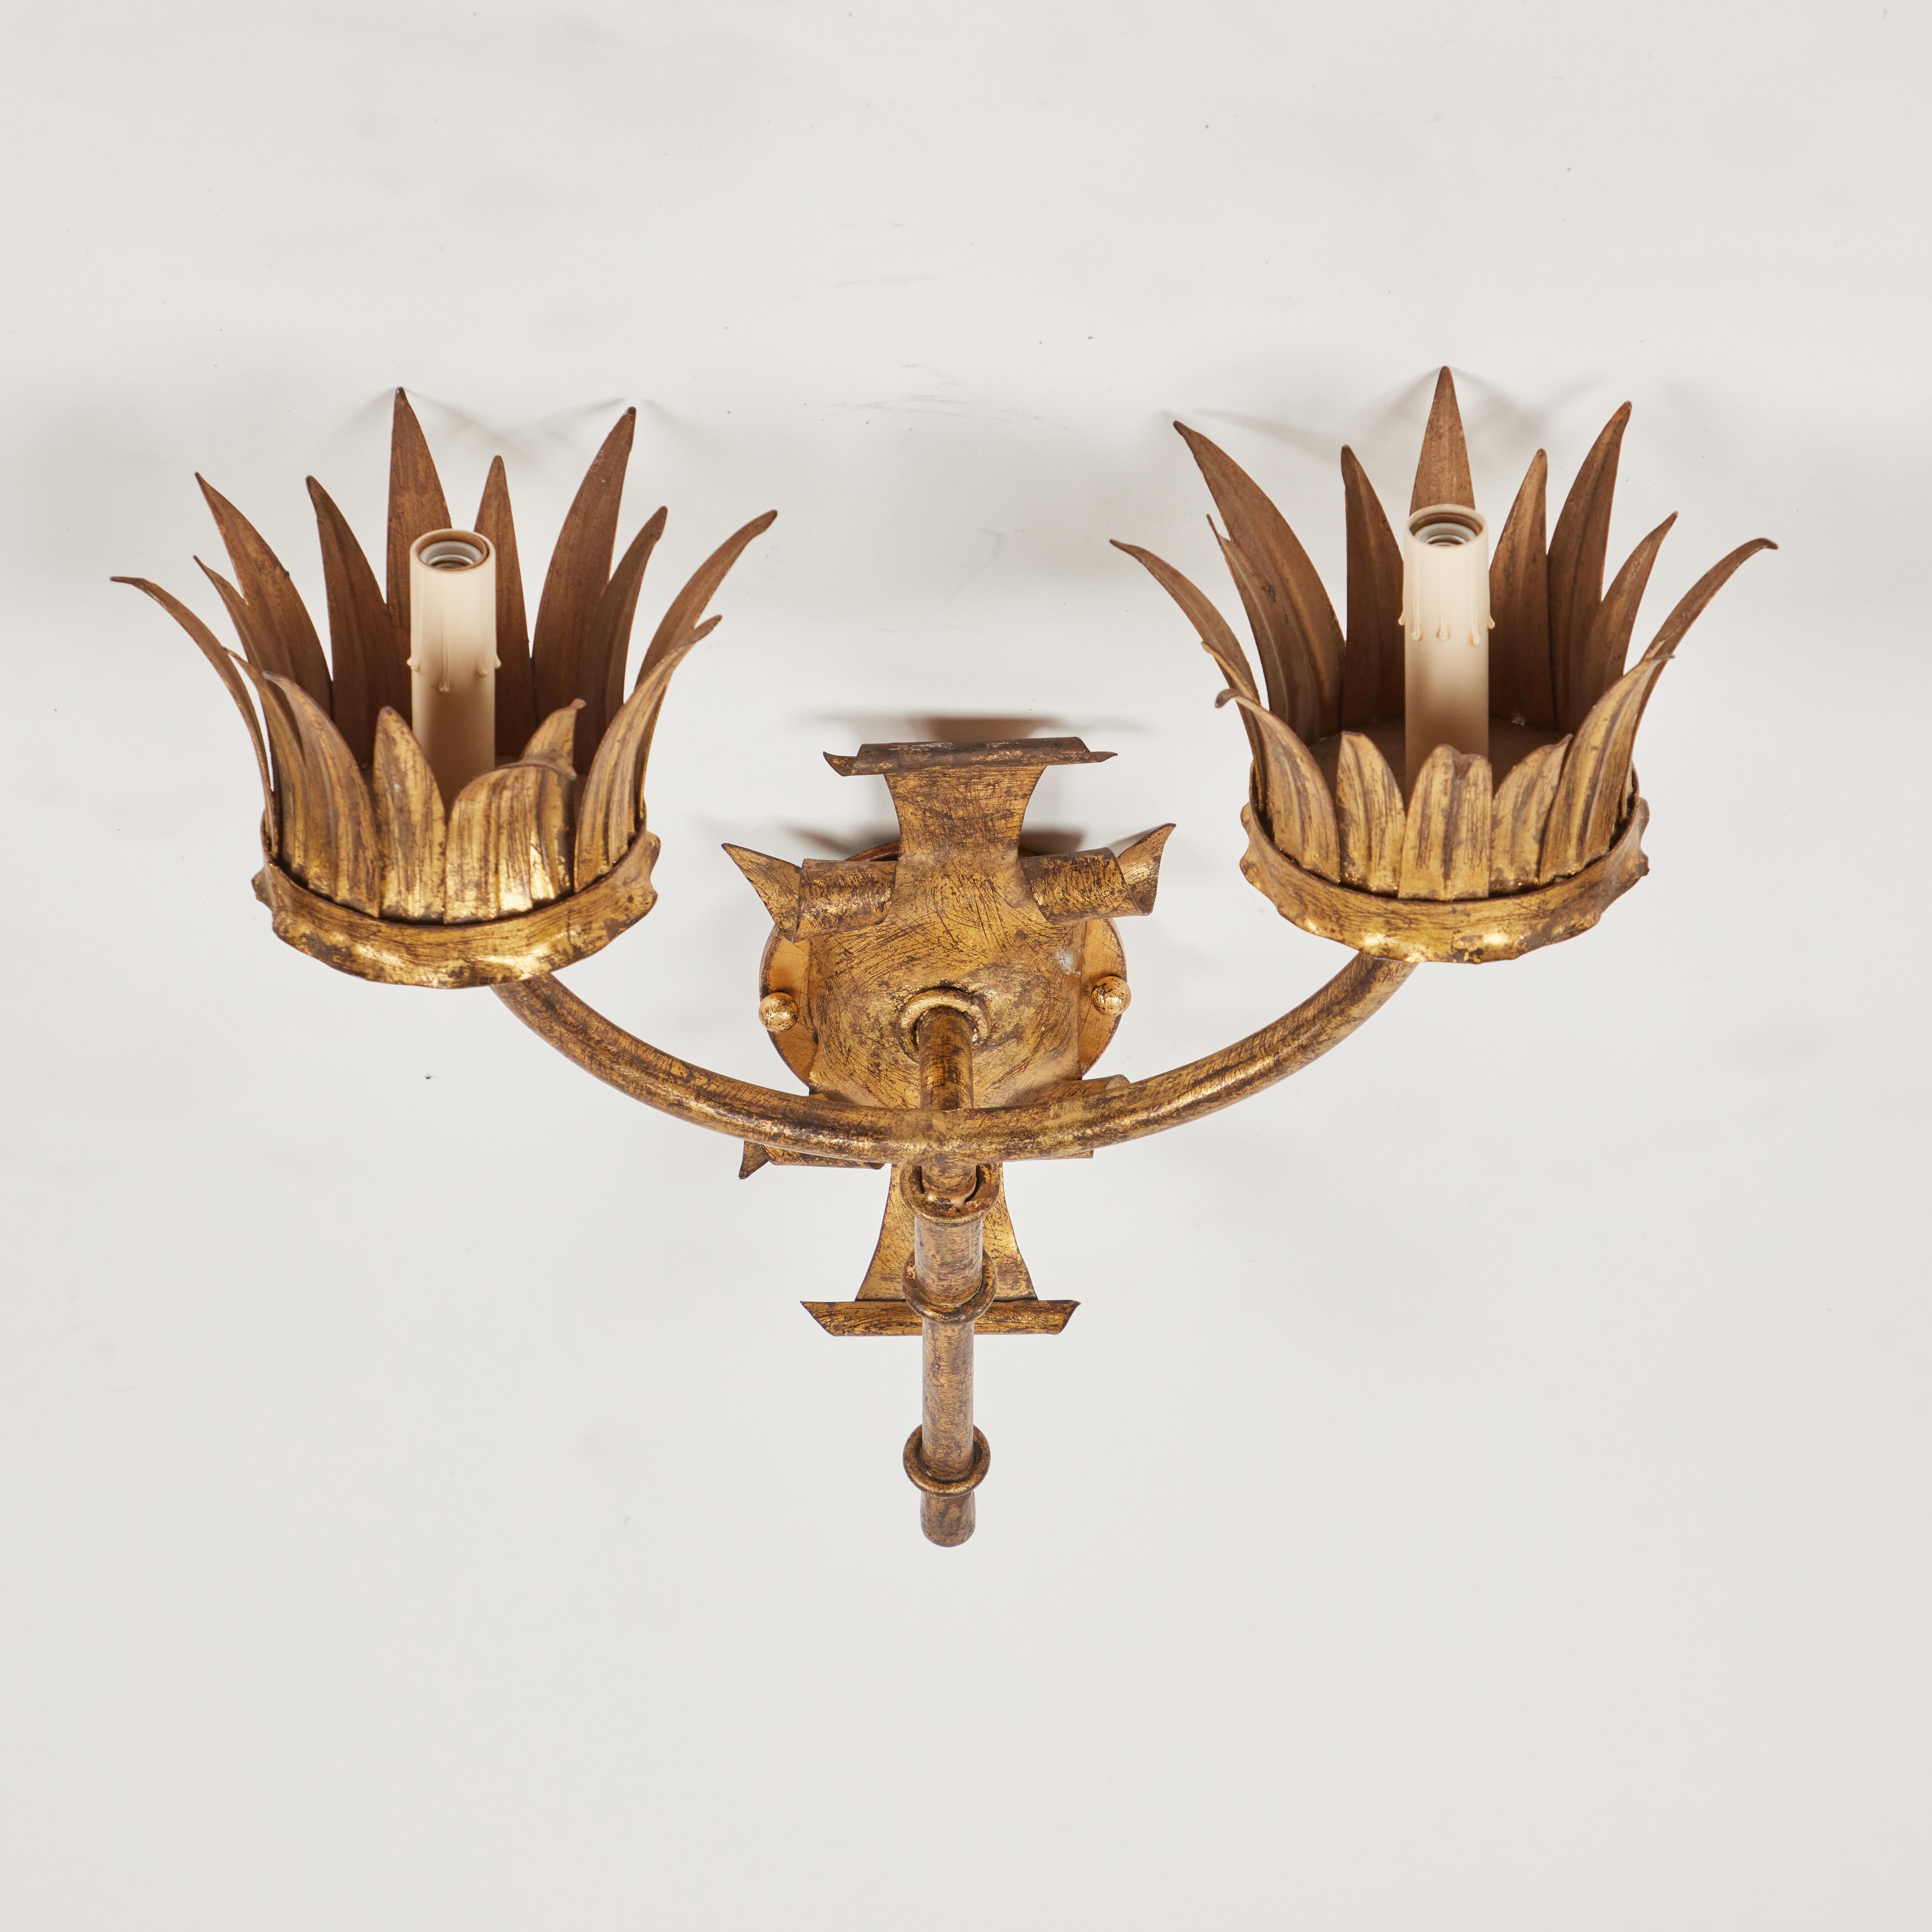 It has a lovely crown of leaves surrounding the light at the end of each arm, a rich gold leaf finish and has been newly rewired. This is a stunning accent on any wall. Made in Spain.


Measures: 18